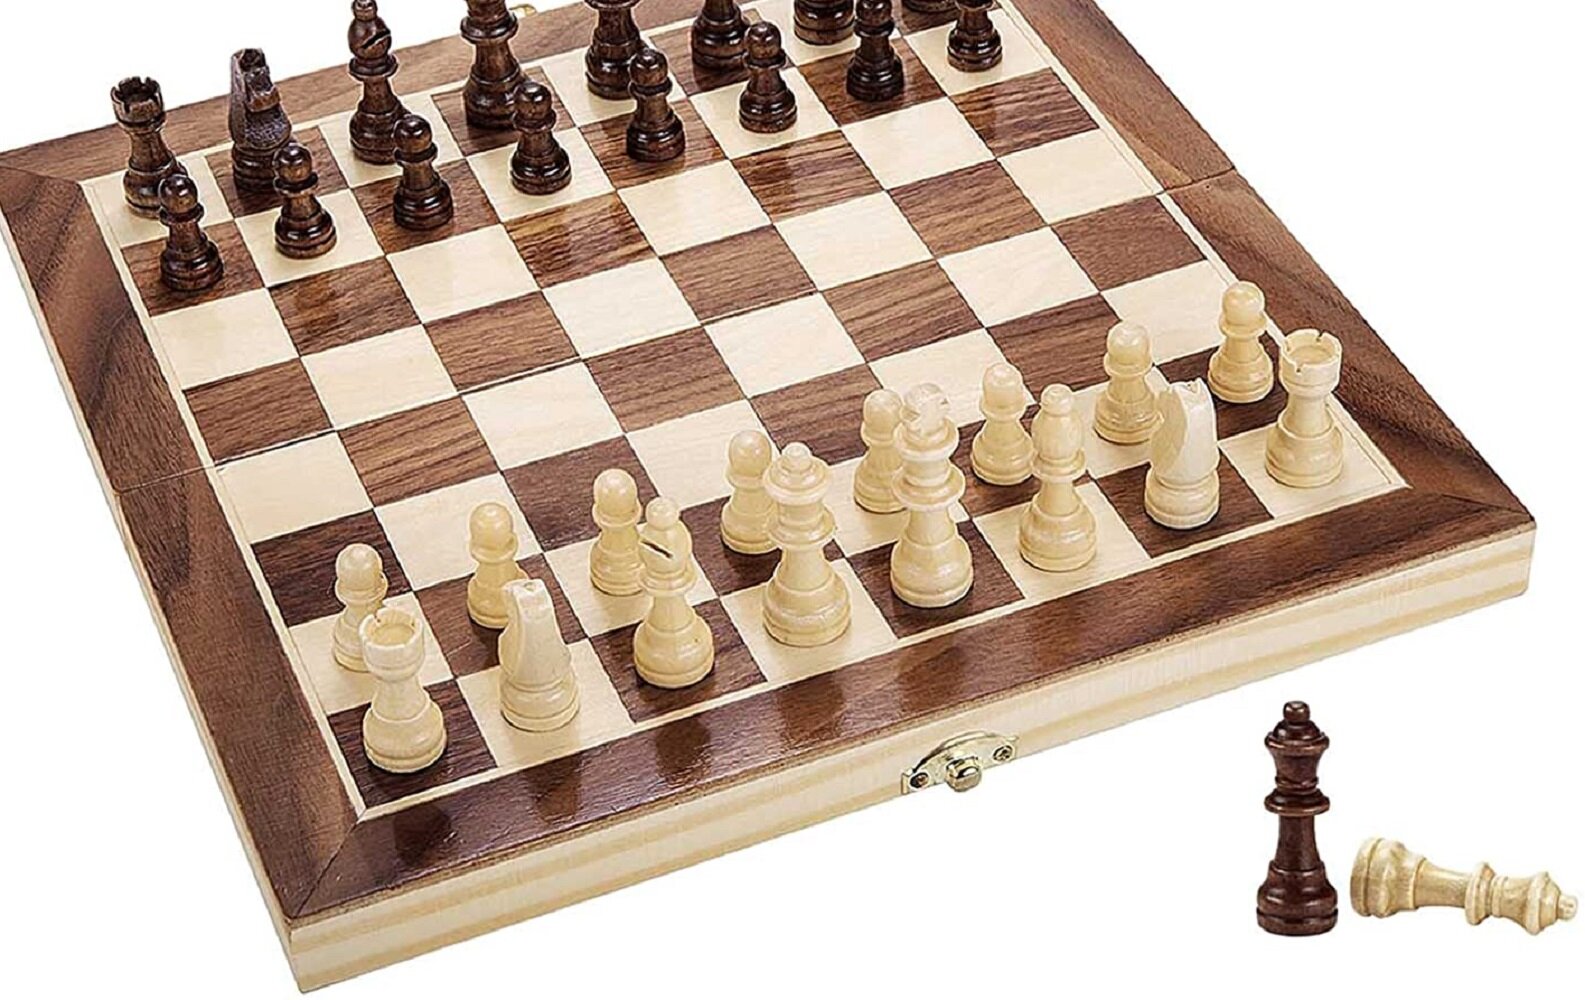 Magnetic Wooden Travel Chess Set Large Hand Crafted 38 X 38 cm BRAND NEW !